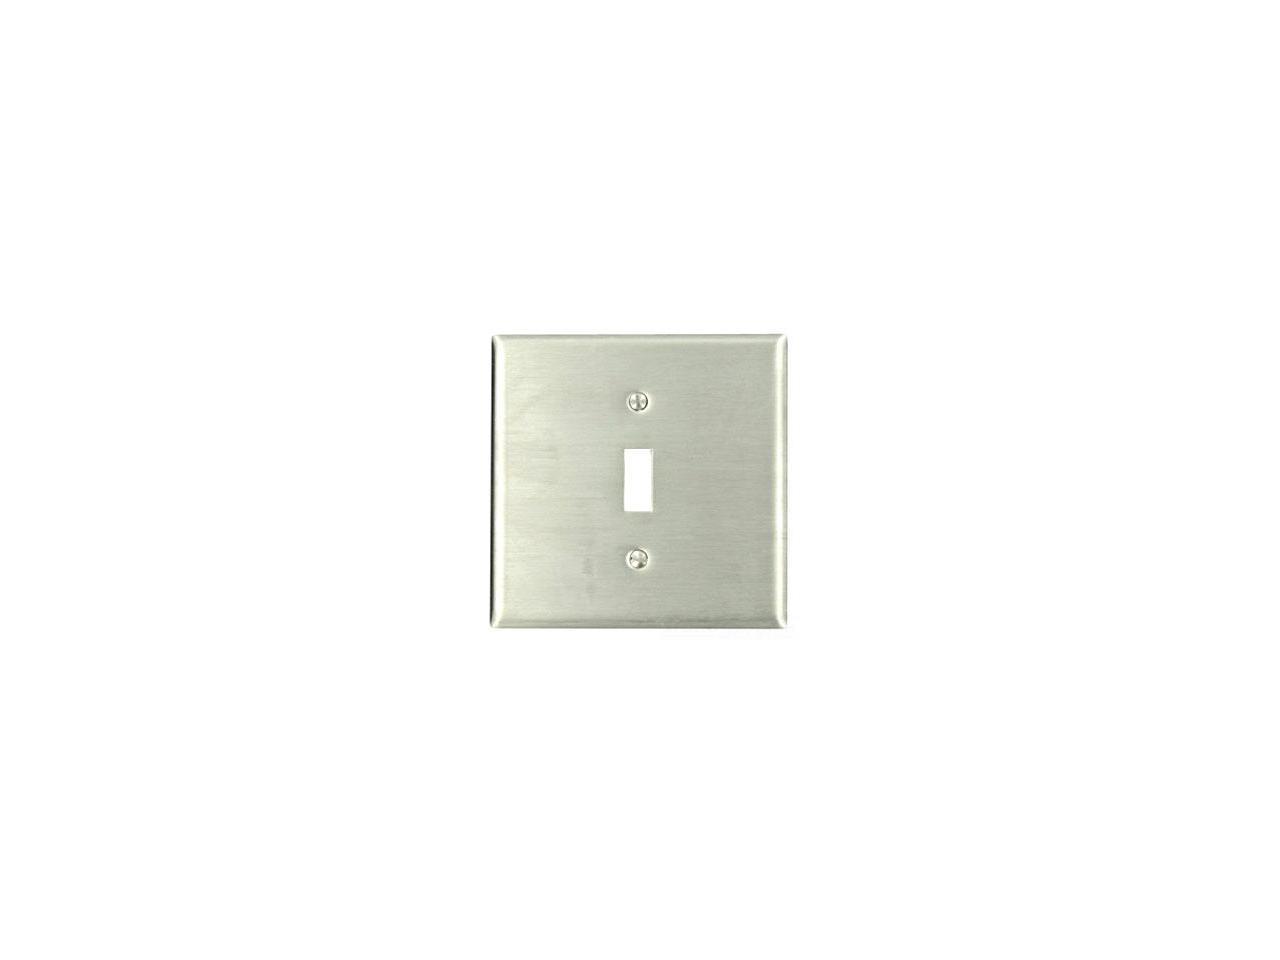 Device Mount Leviton 84040-40 2-Gang 1-Toggle Centered Device Switch Wallplate Stainless Steel 